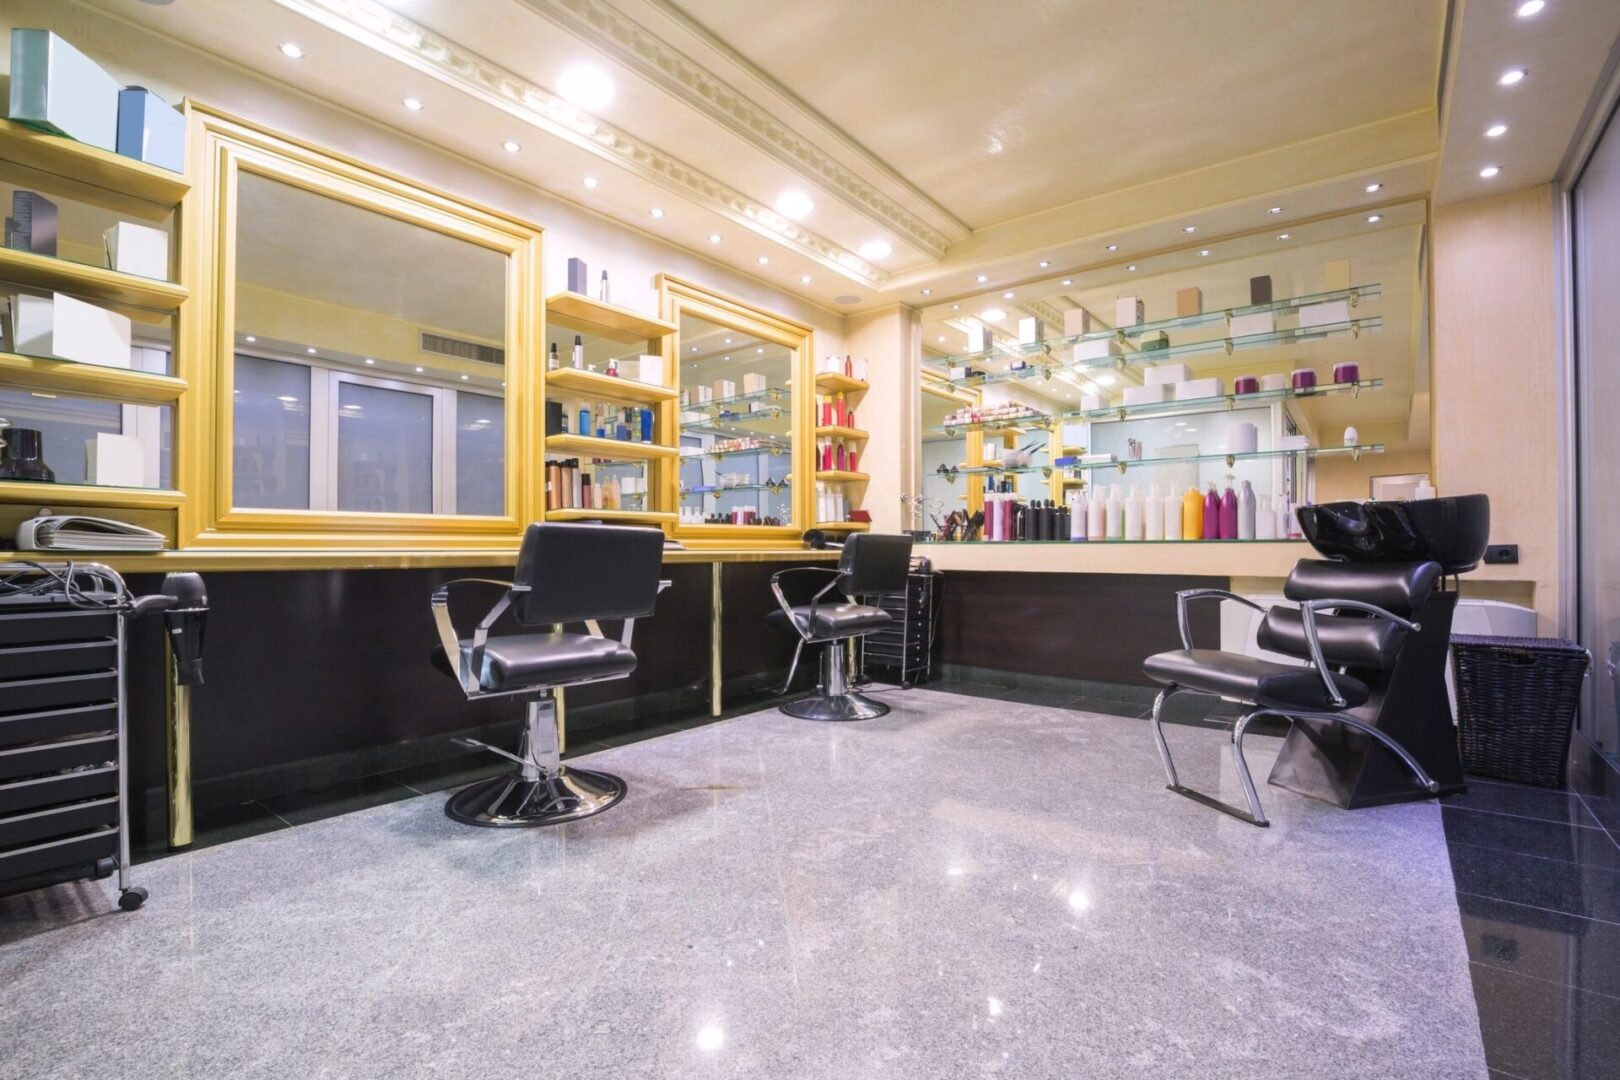 A hair salon with many chairs and shelves of products.